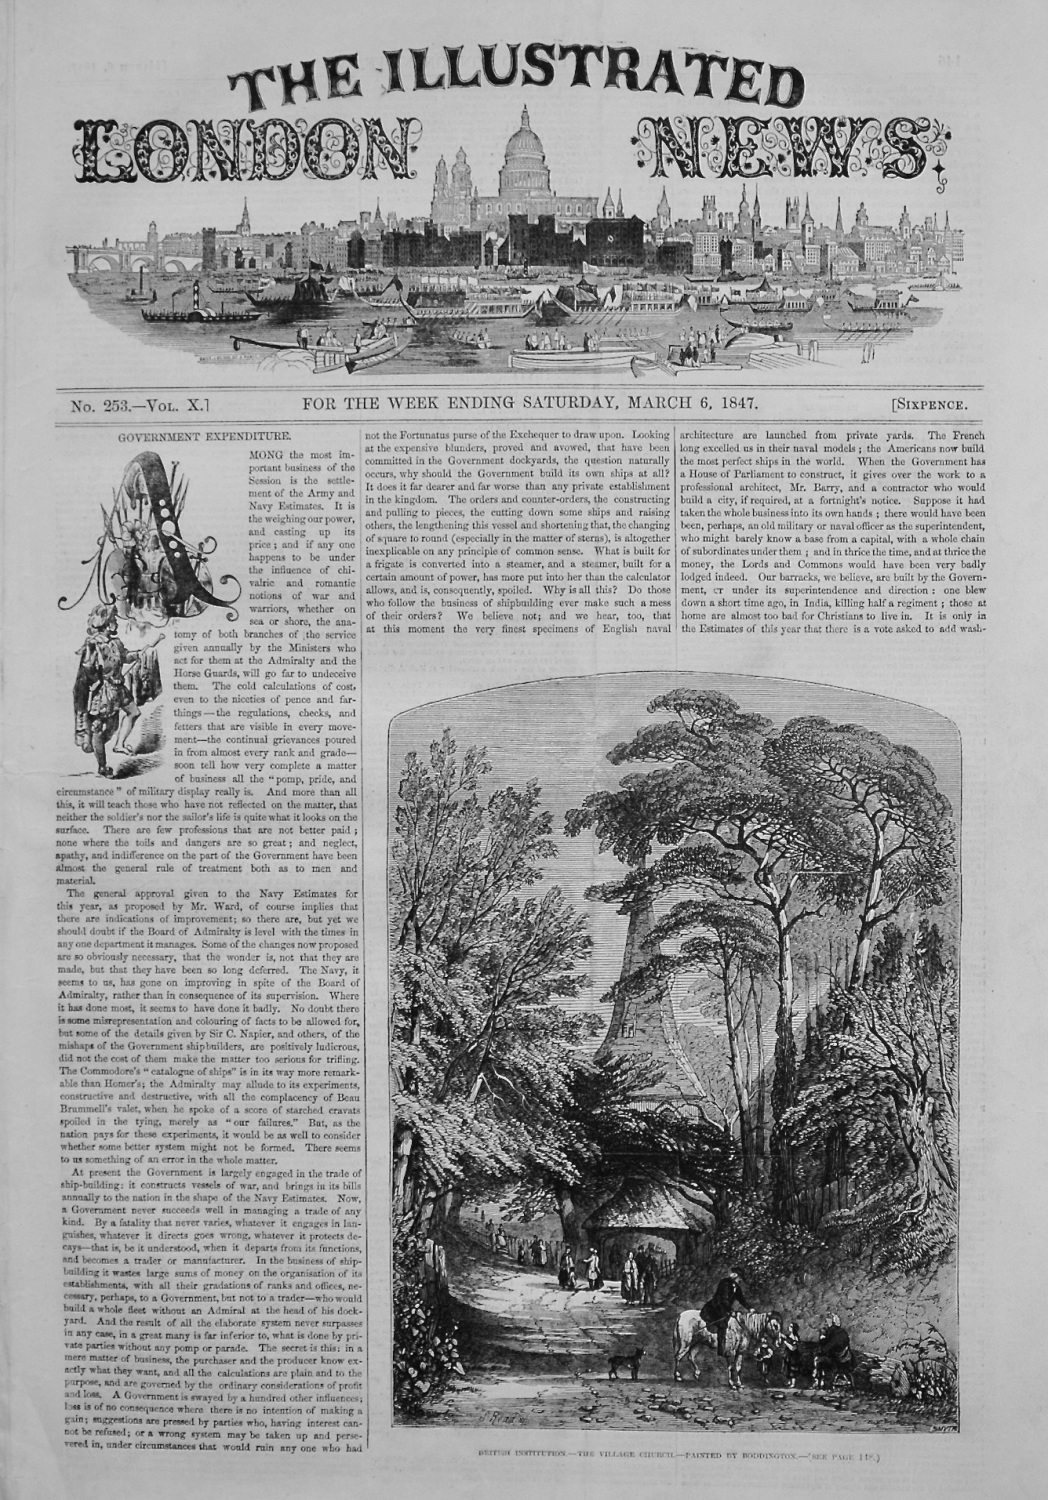 Illustrated London News. March 6th, 1847.